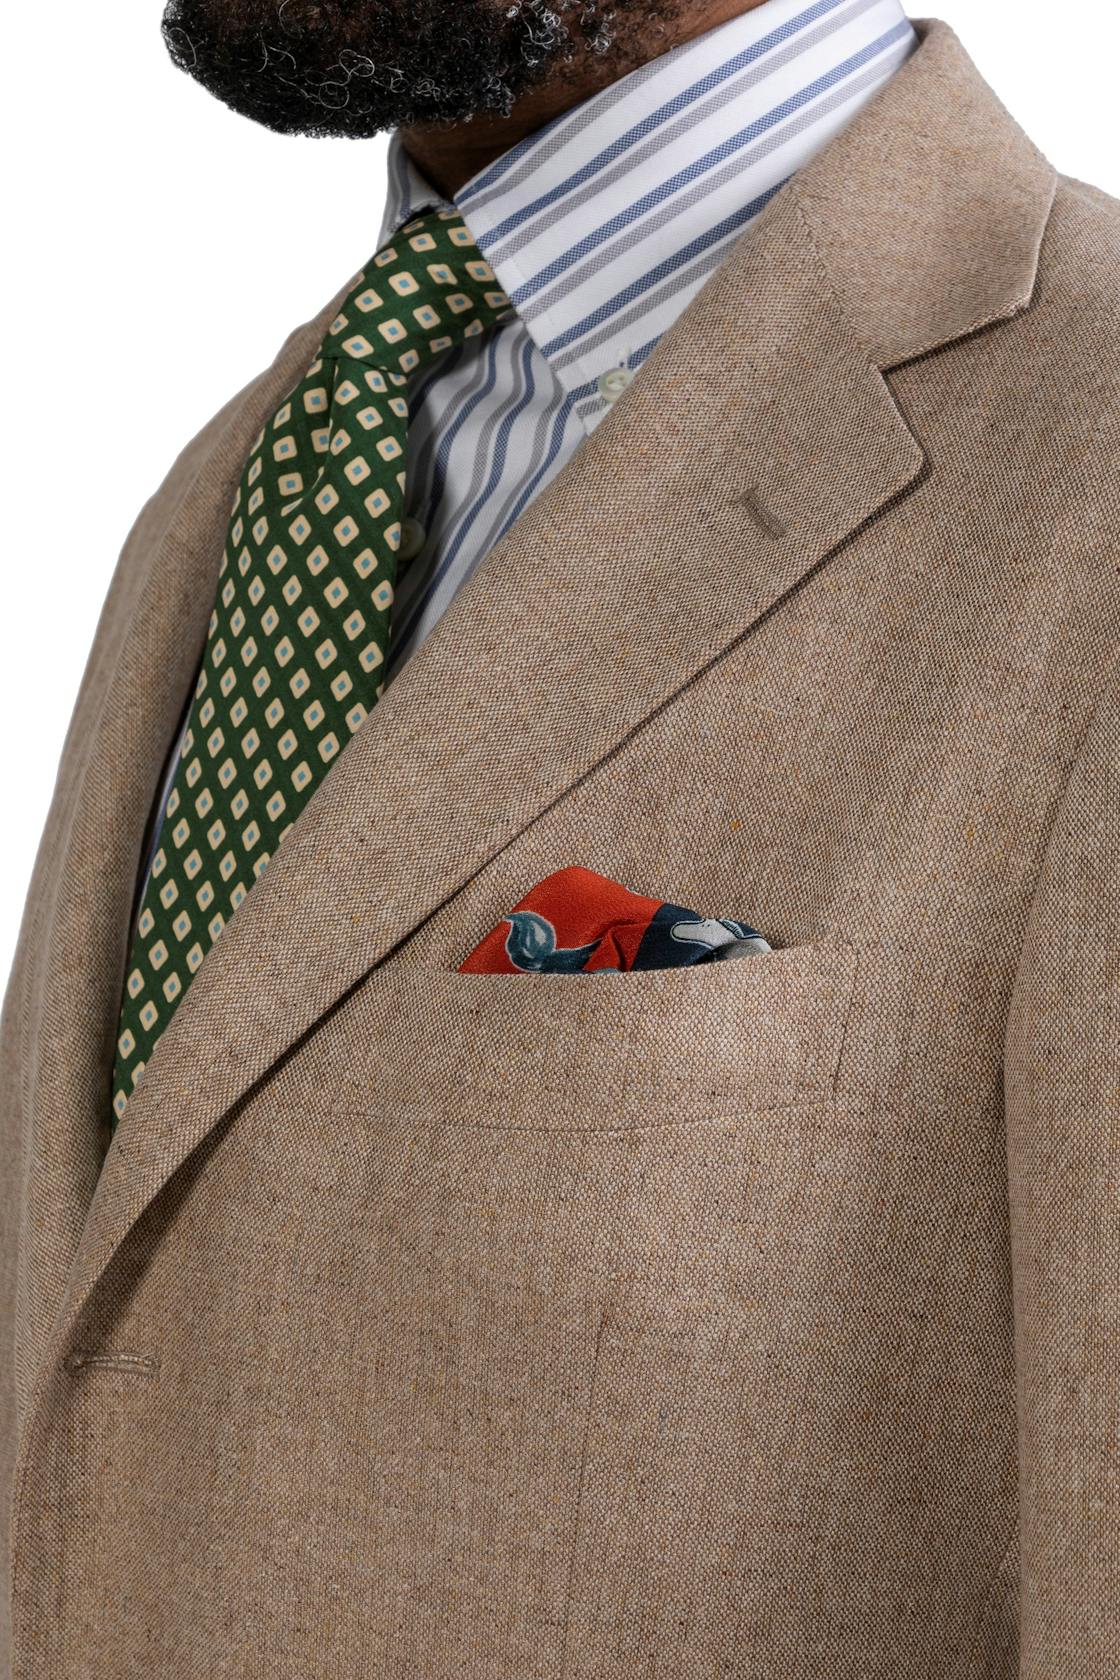 The Armoury by Ring Jacket Model 3 Beige Silk Sport Coat